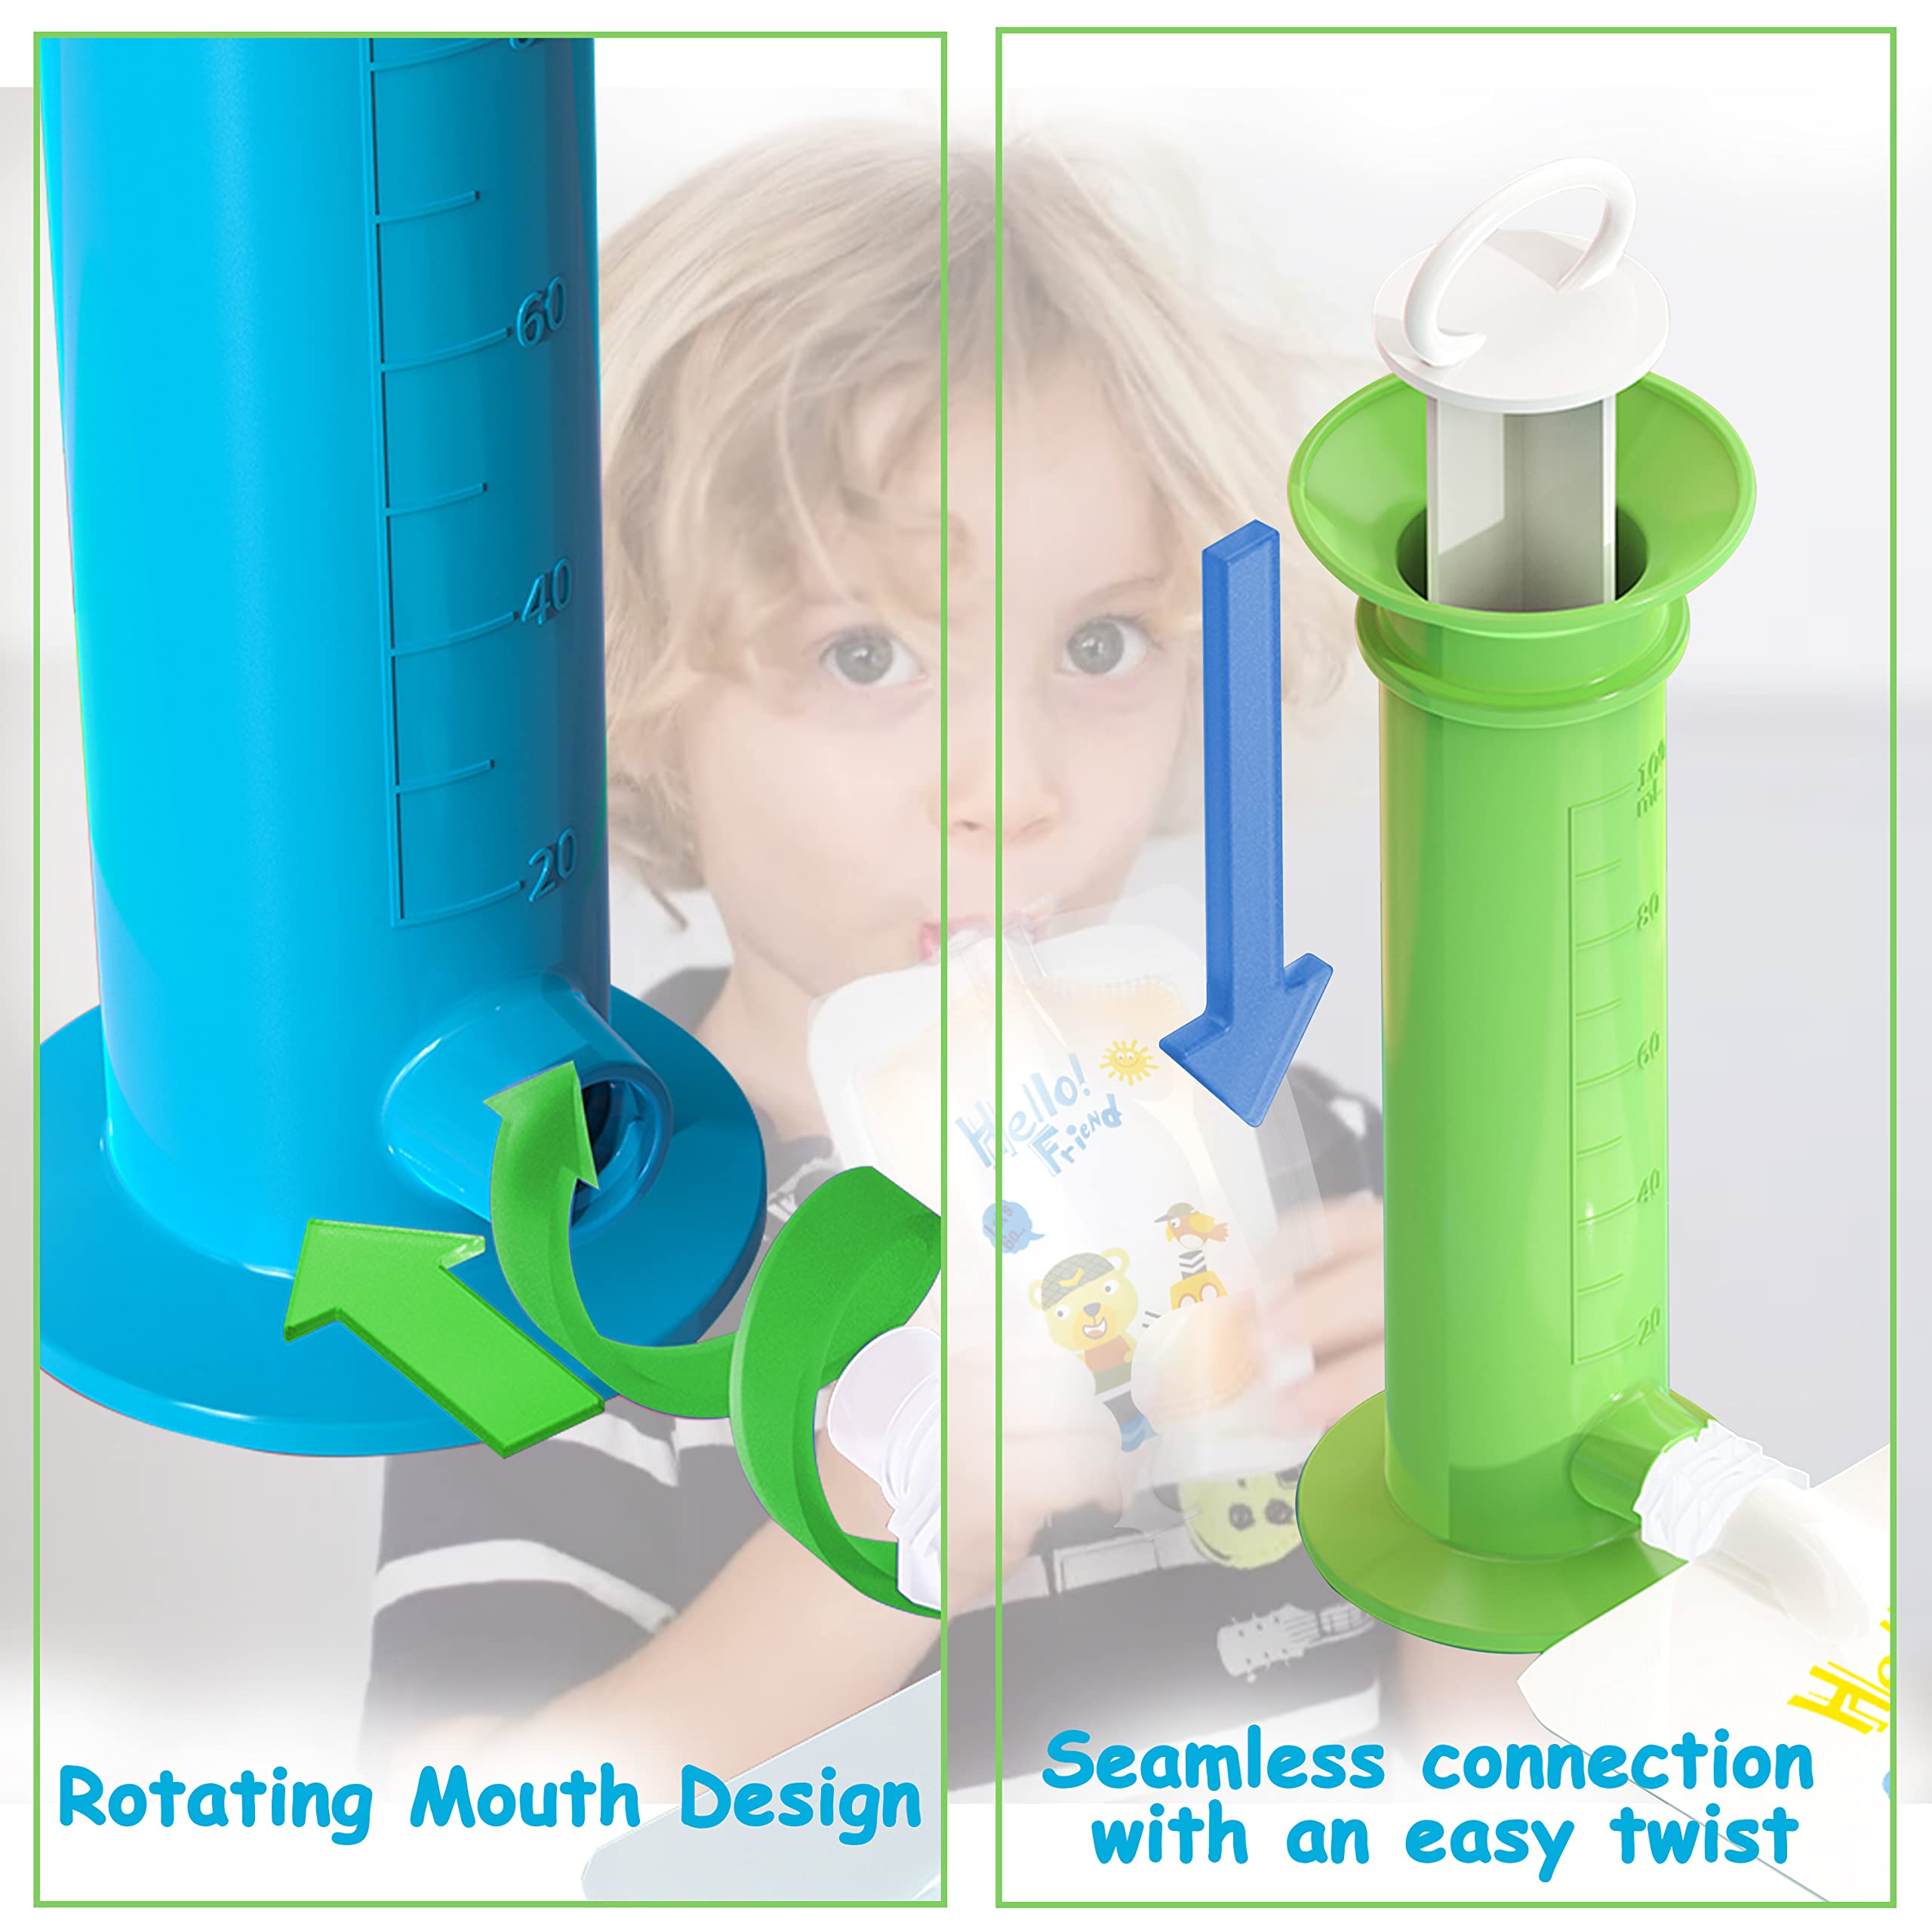 Fruit Puree Filler, Portable Food Pouch Filler Fruit Squeeze Puree Filler Vegetable Puree Maker Fruit Juice Food Maker with 12pcs Reusable Food Pouches for Kids Indoor and Outdoor Usage (Green)